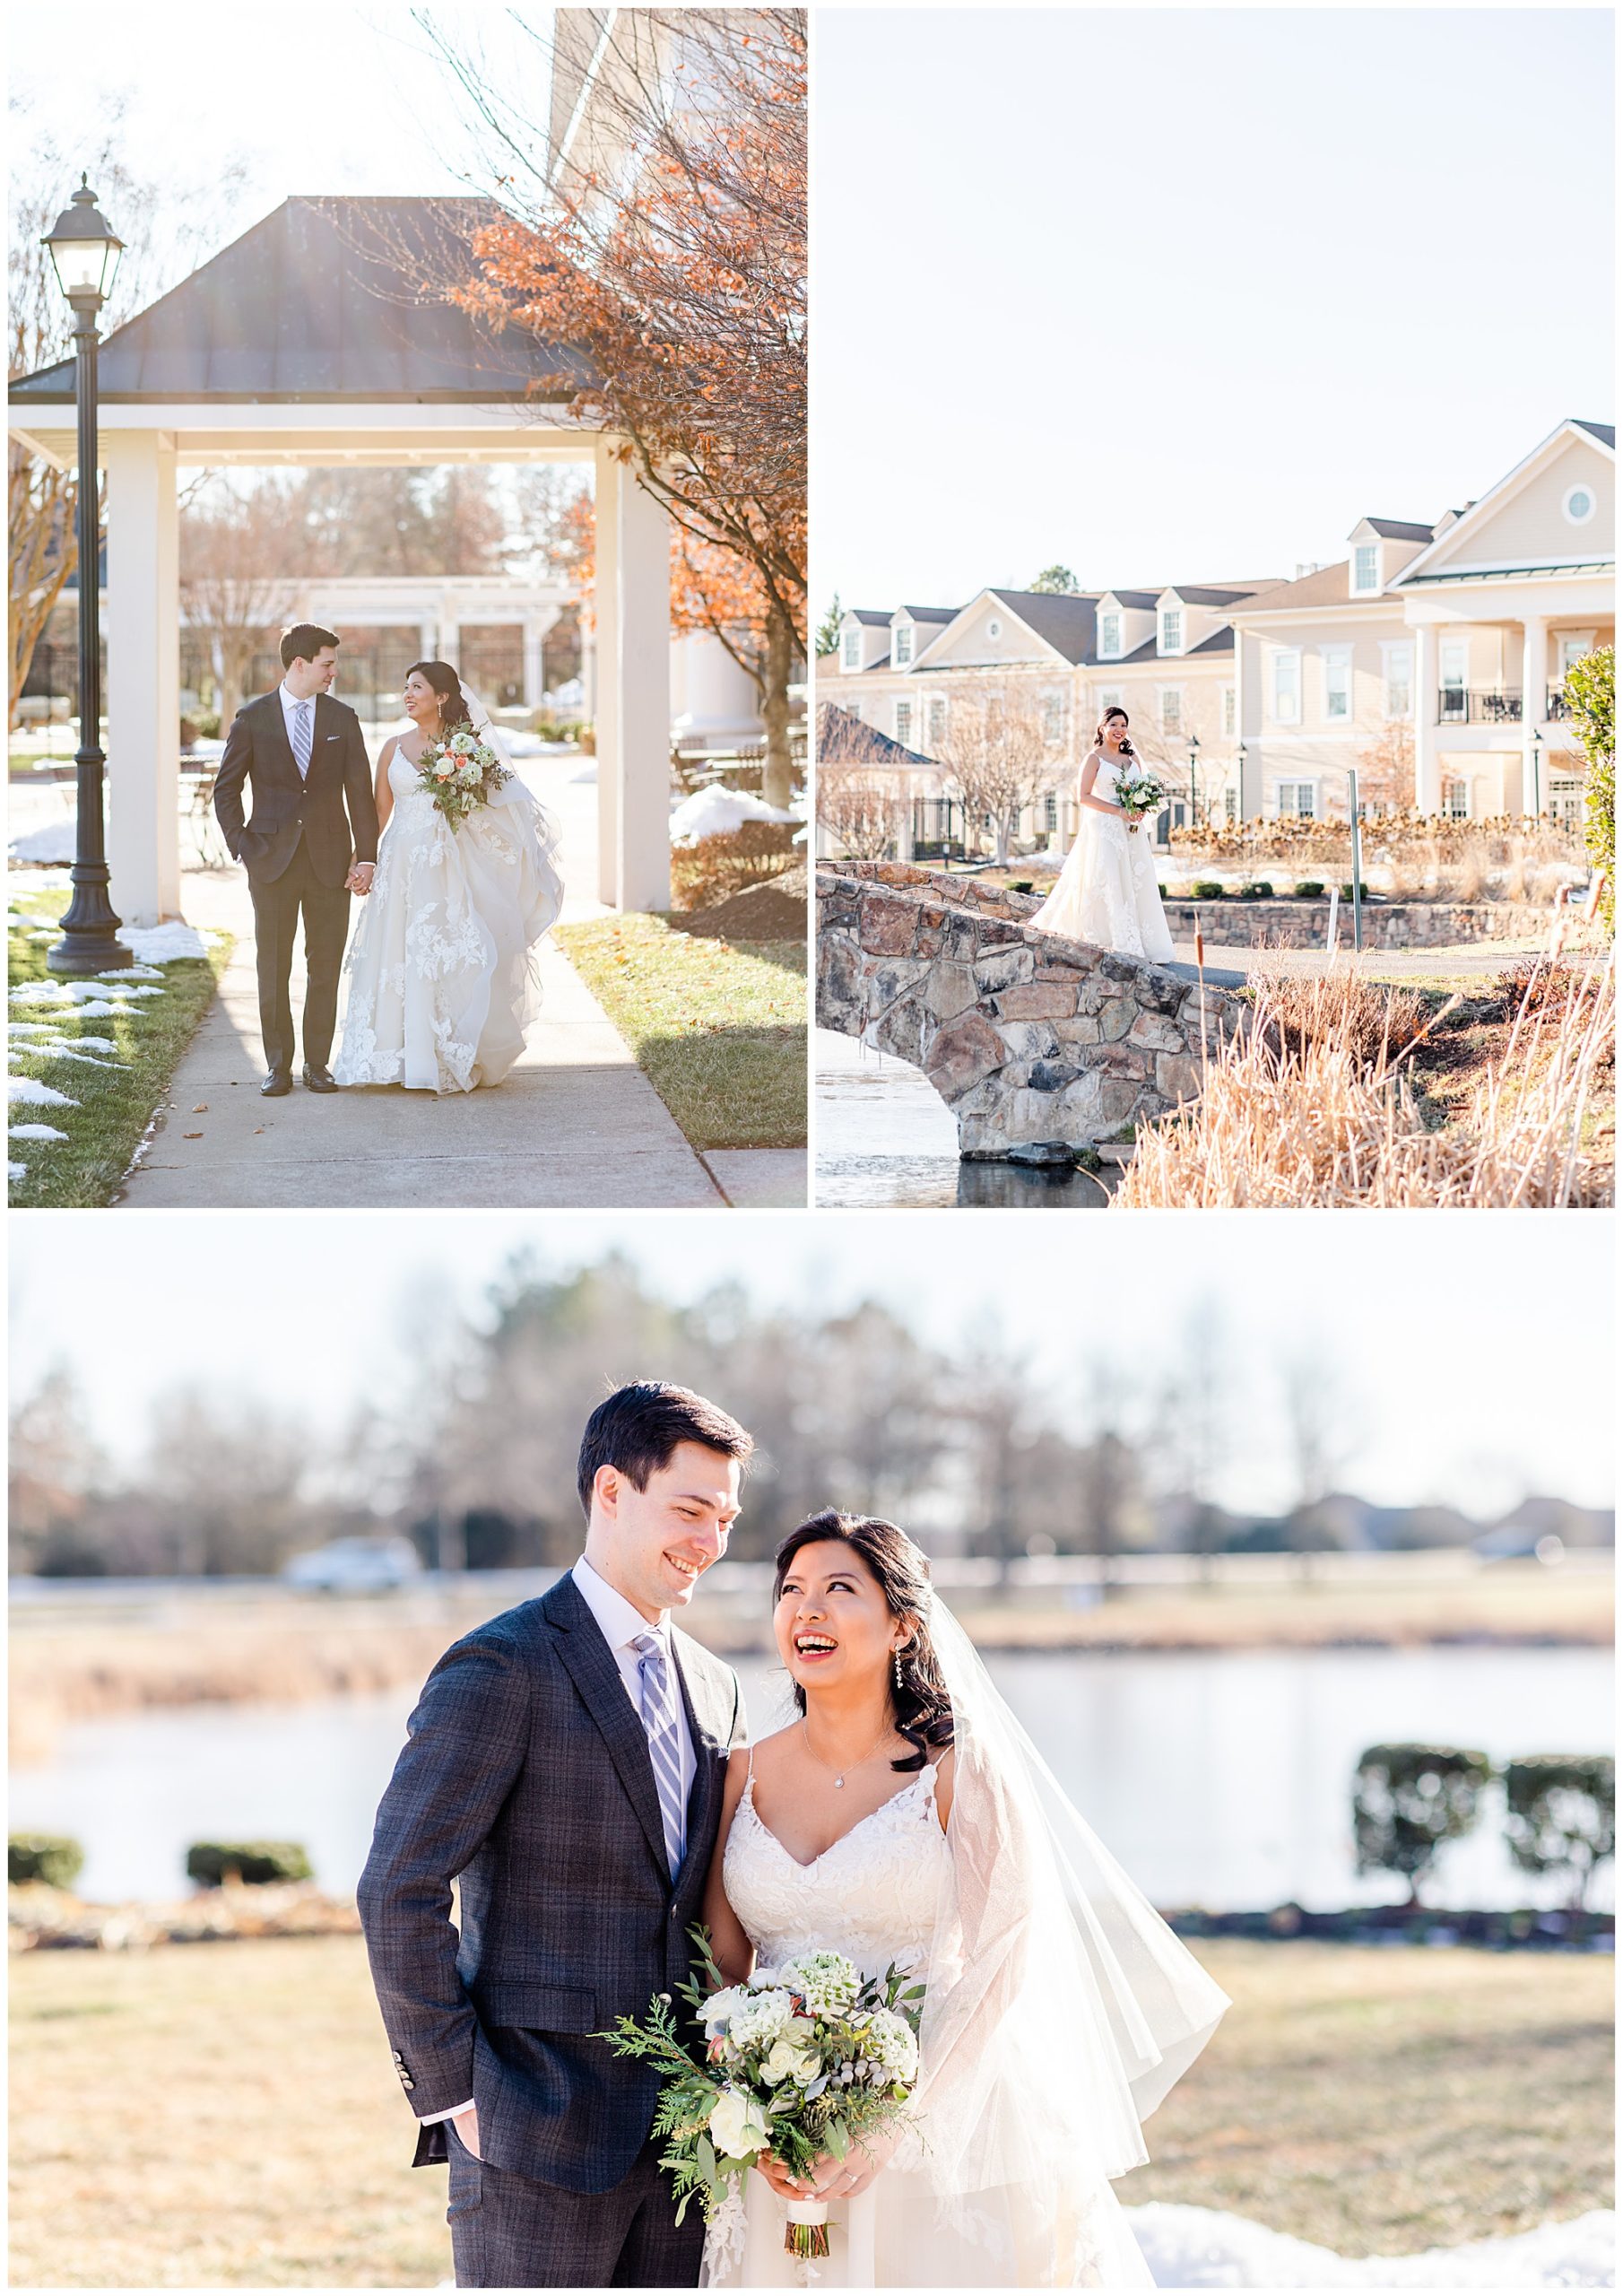 Regency at Dominion Valley wedding, Virginia country club wedding, Haymarket Virginia wedding, northern Virginia wedding, winter wedding, winter wedding aesthetic, DC micro wedding, northern Virginia wedding venues, classic winter wedding, Rachel E.H. Photography, acinda Mosby - Bridal Artistry DC, bride and groom on stone bridge, bride and groom holding hands and walking